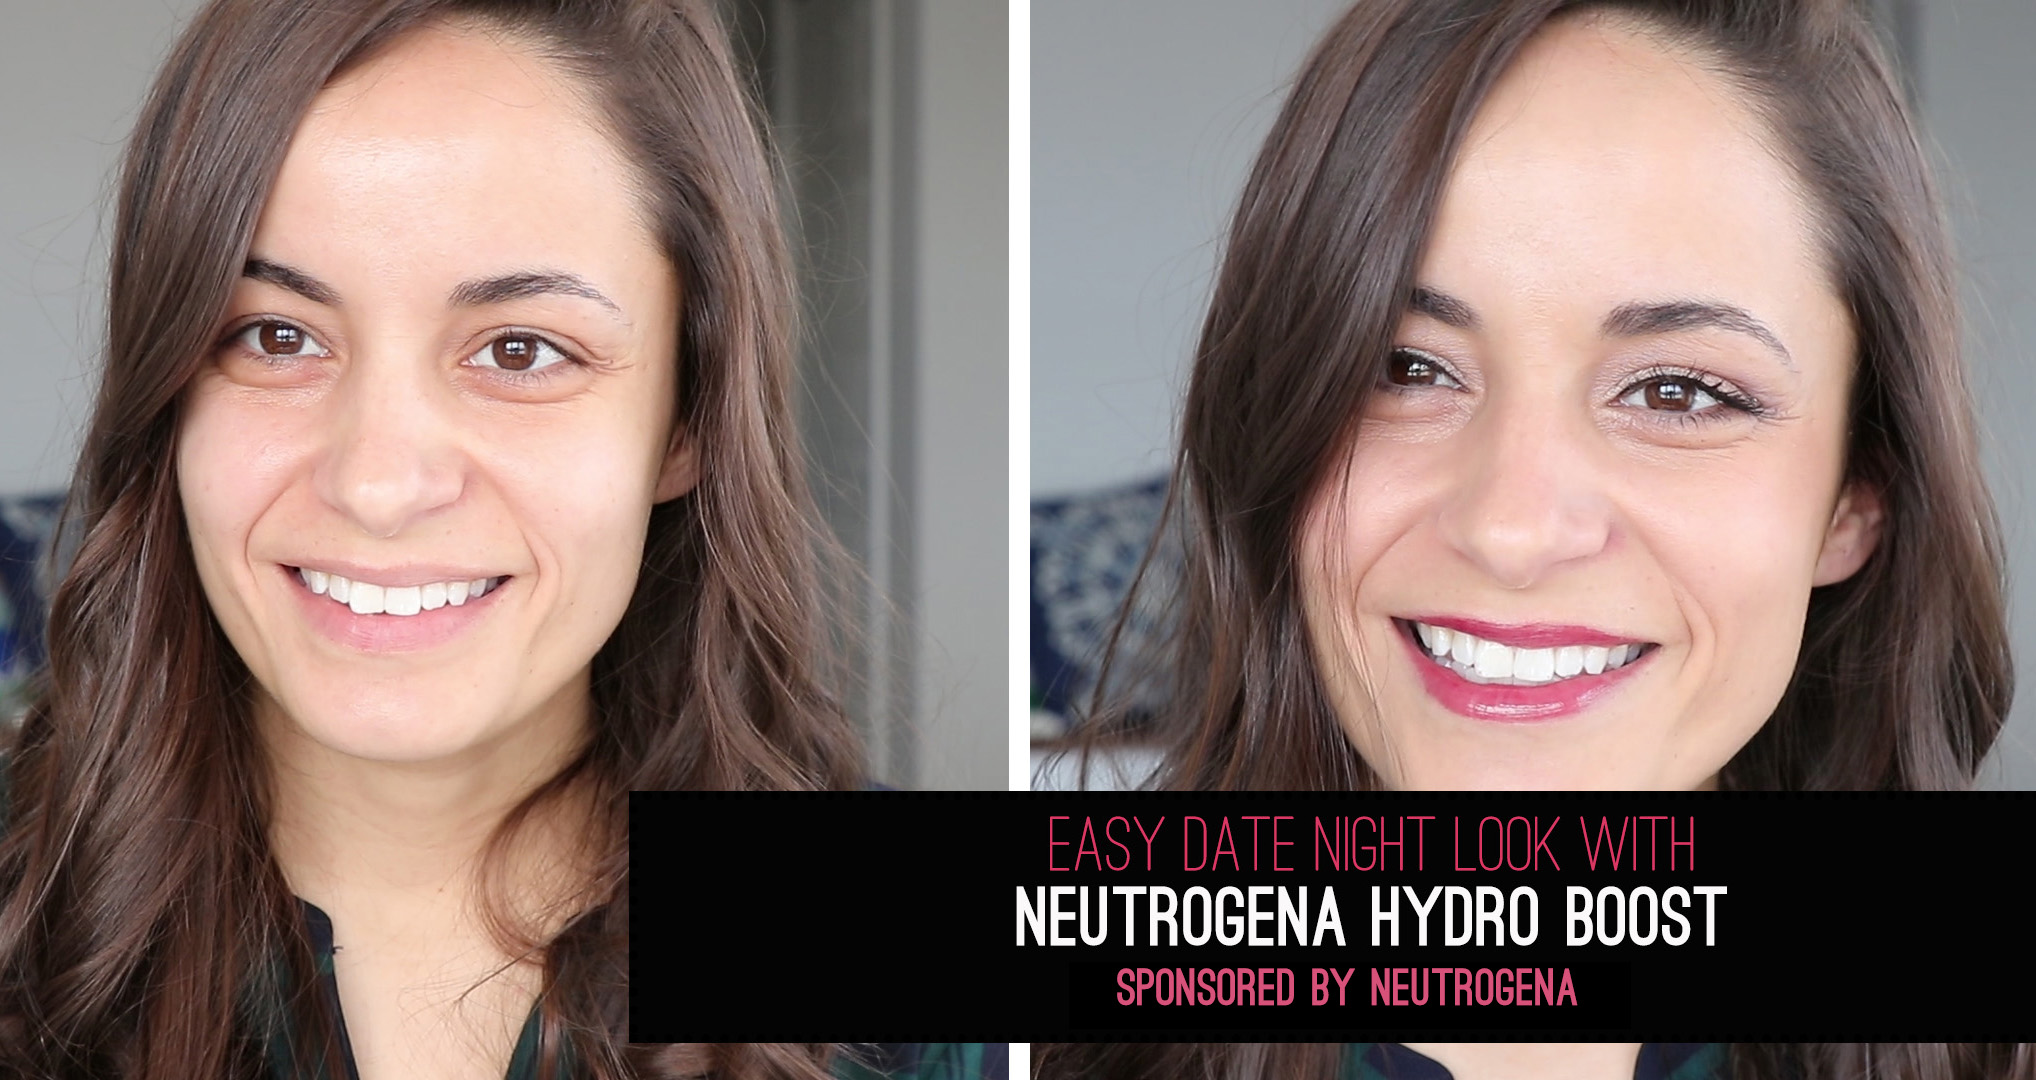 Neutrogena Hydro Boost Hydrating Tint Review and Makeup Tutorial